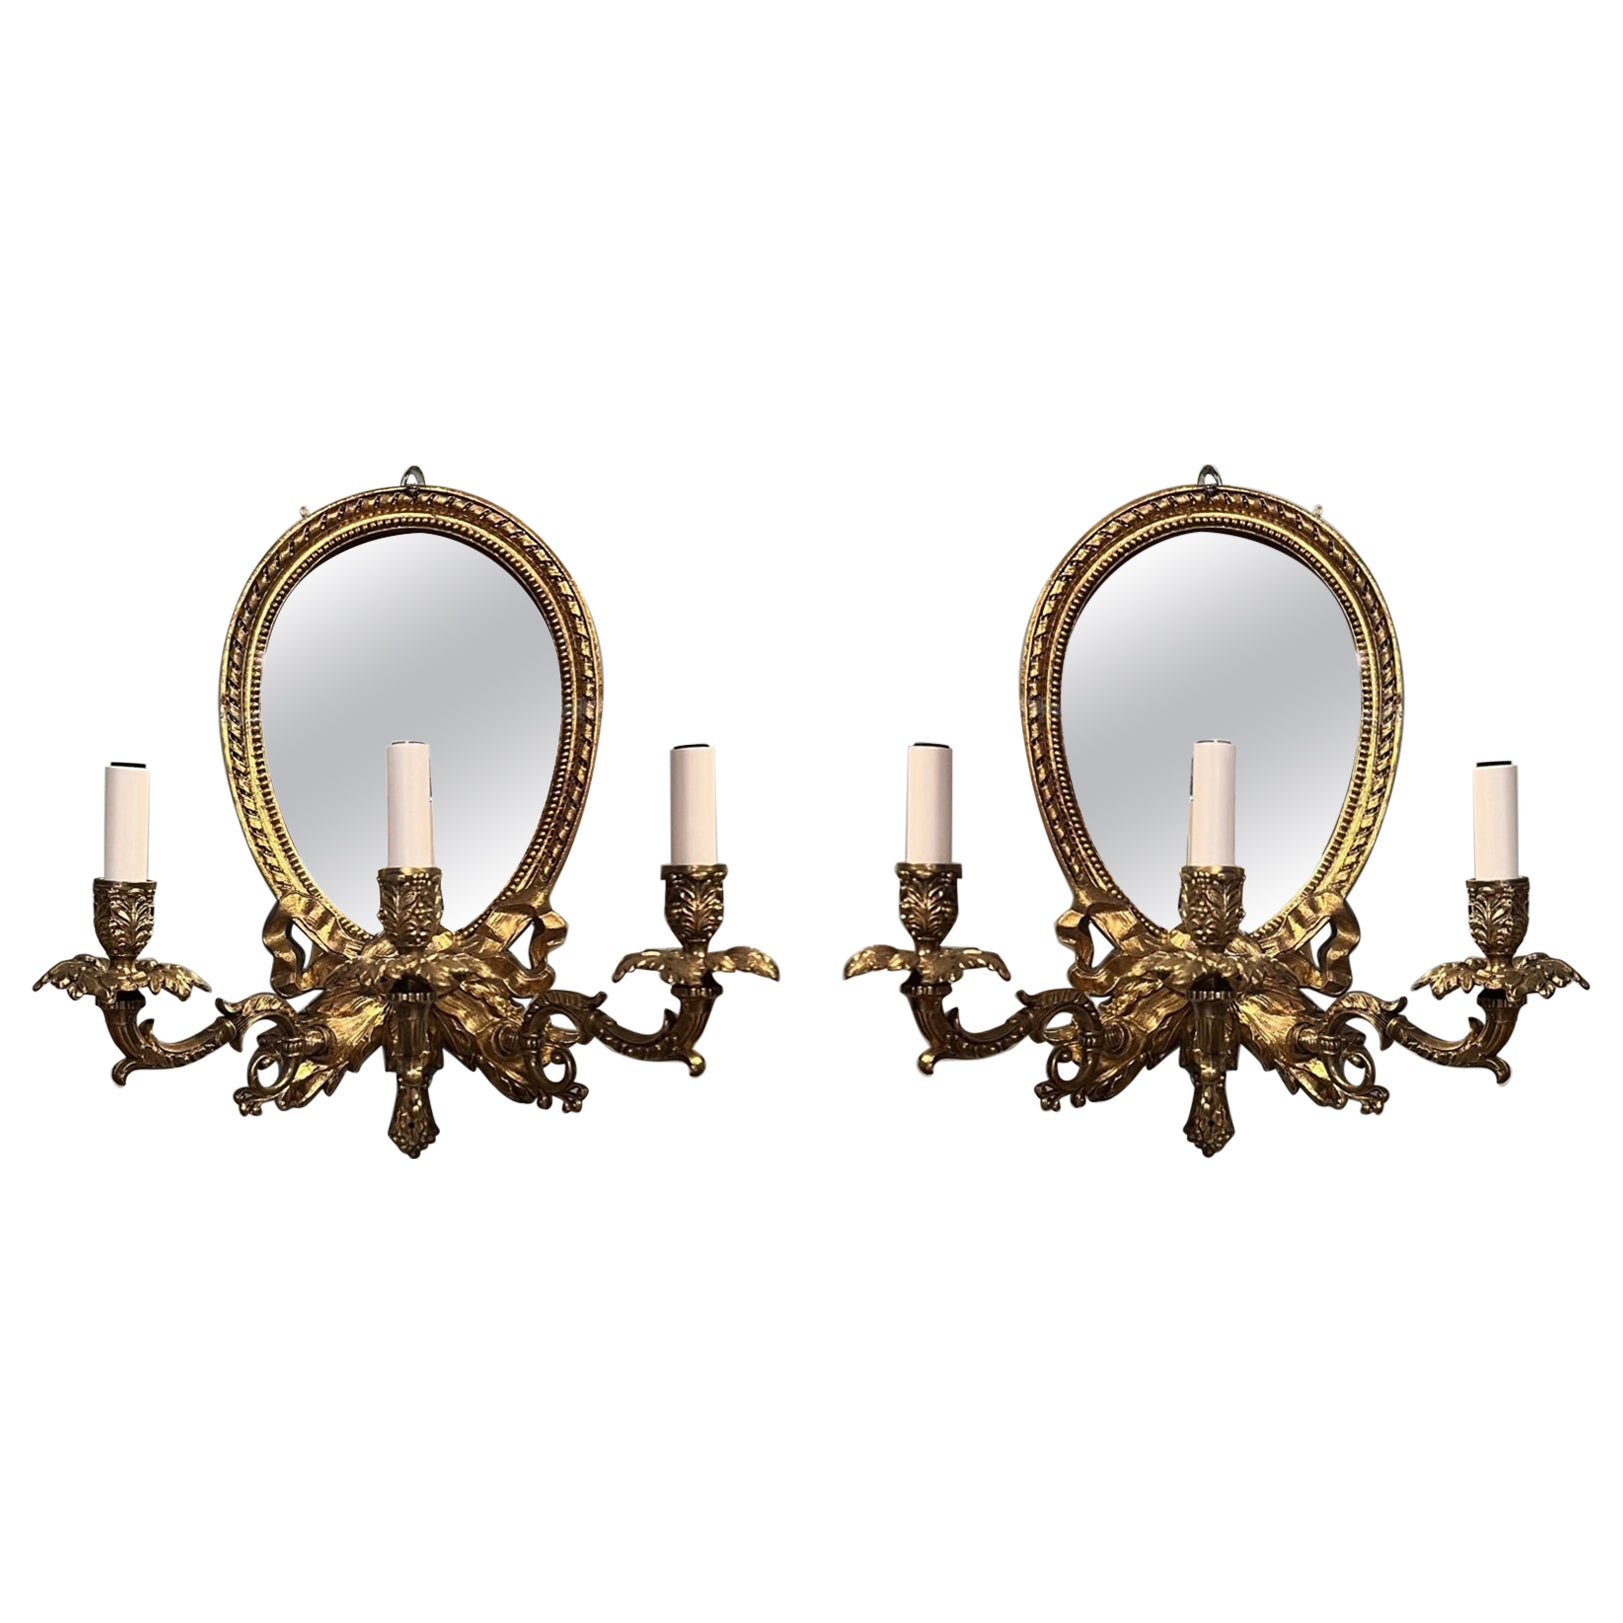 Pair of Antique Mirrored Wall Sconces